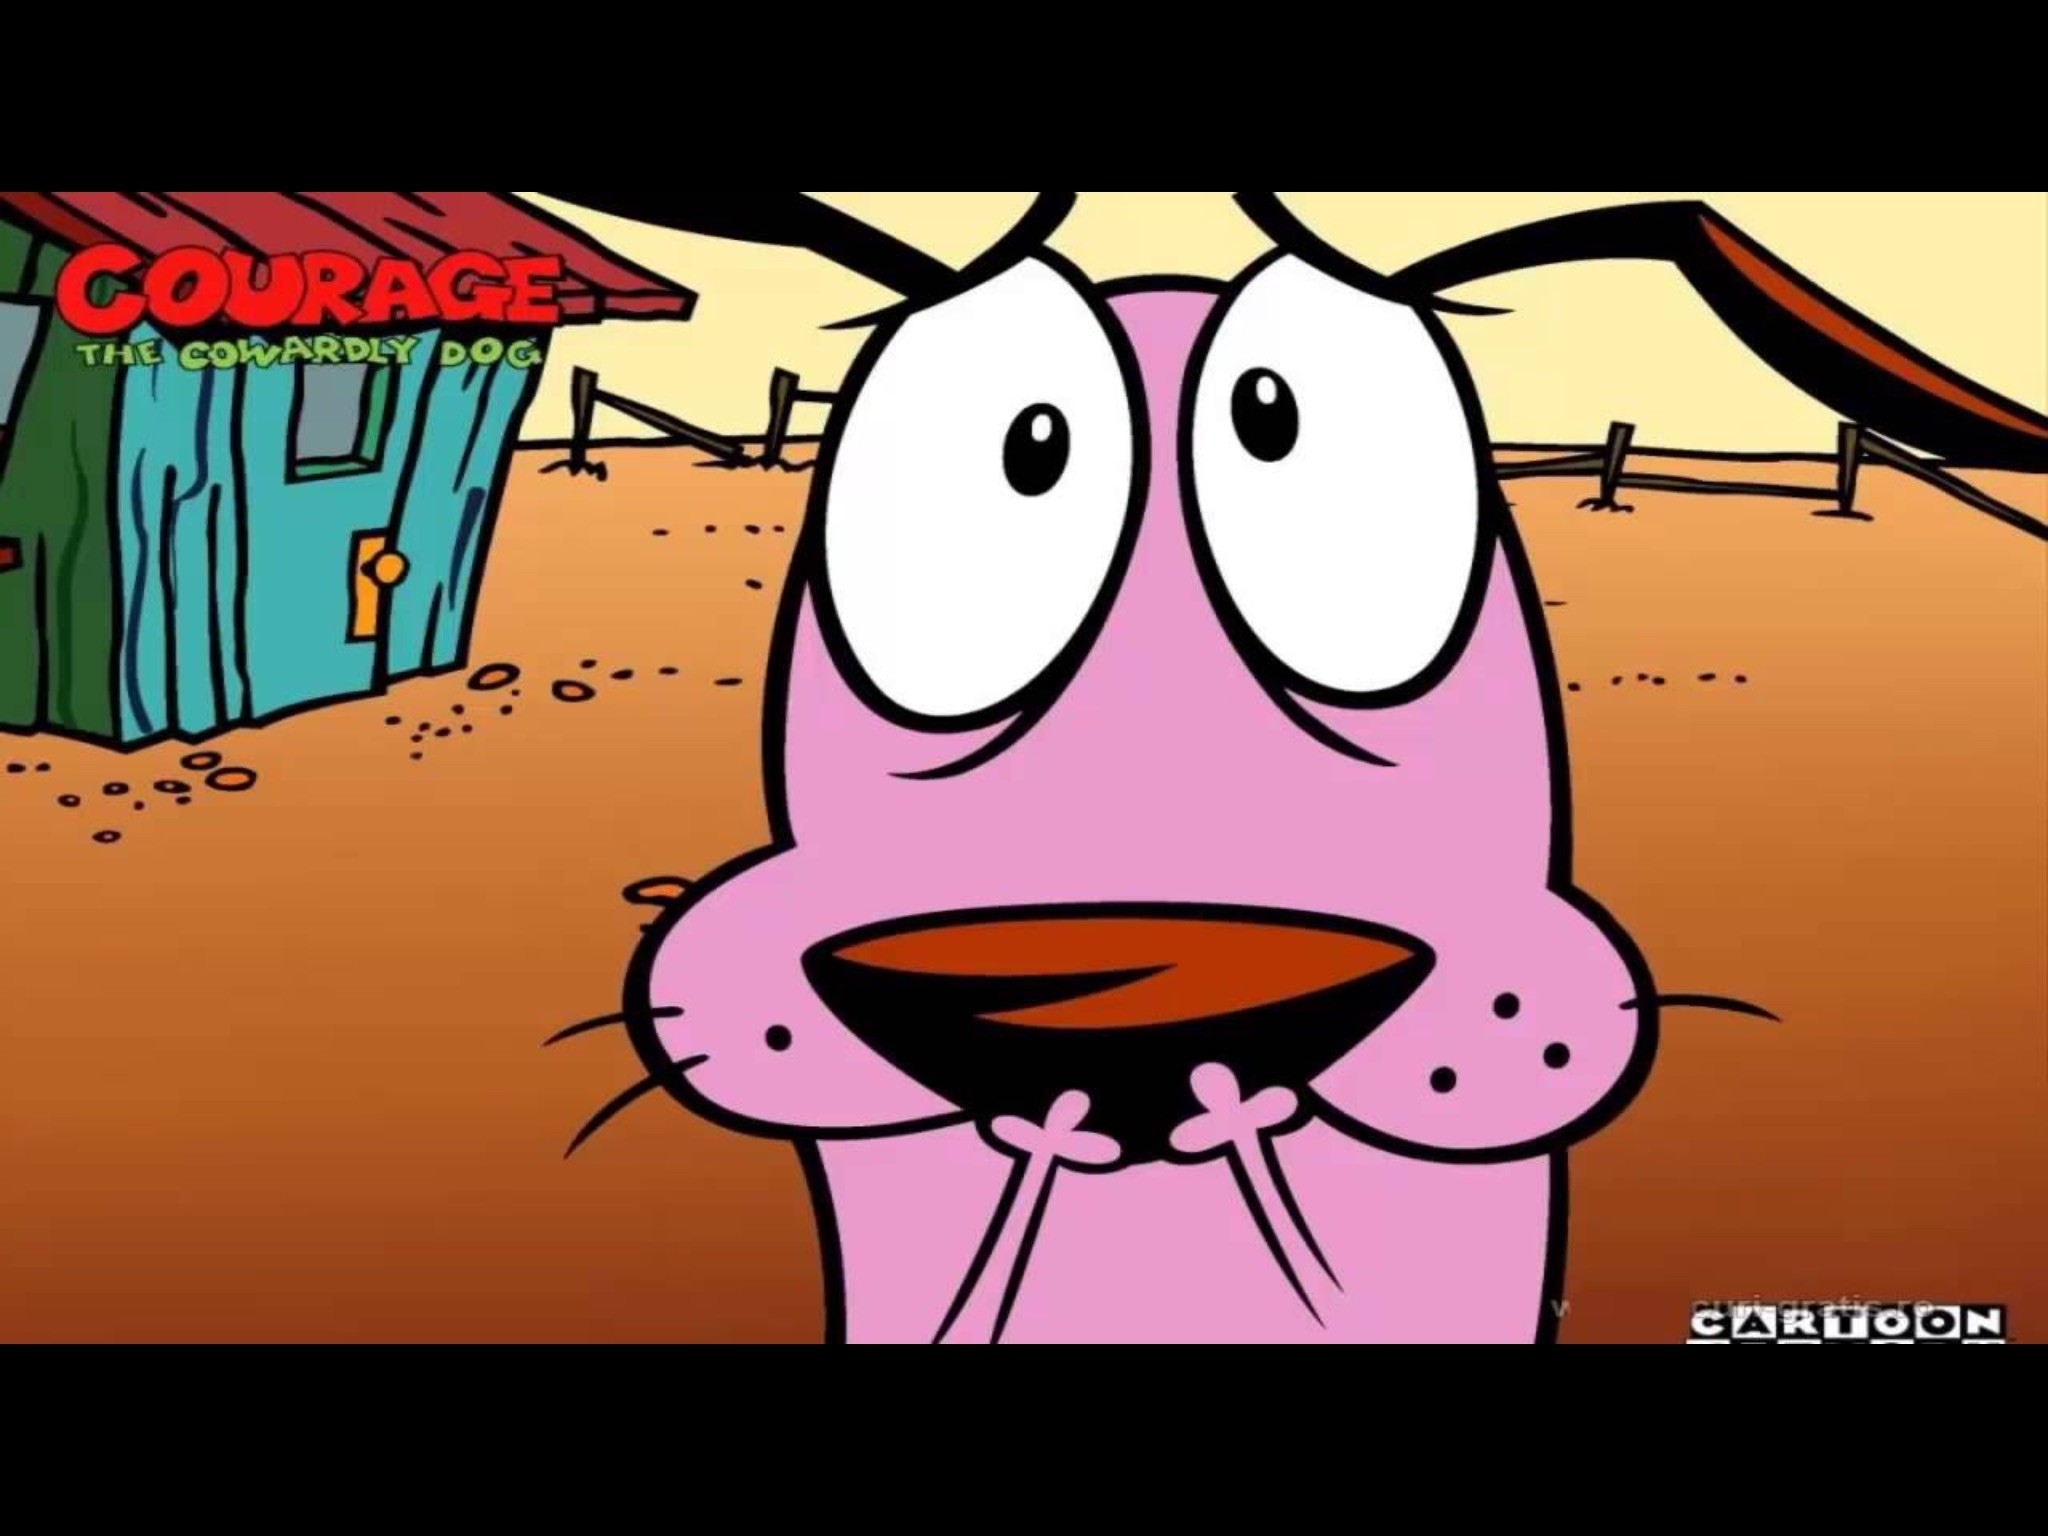 HD courage the cowardly dog wallpapers | Peakpx